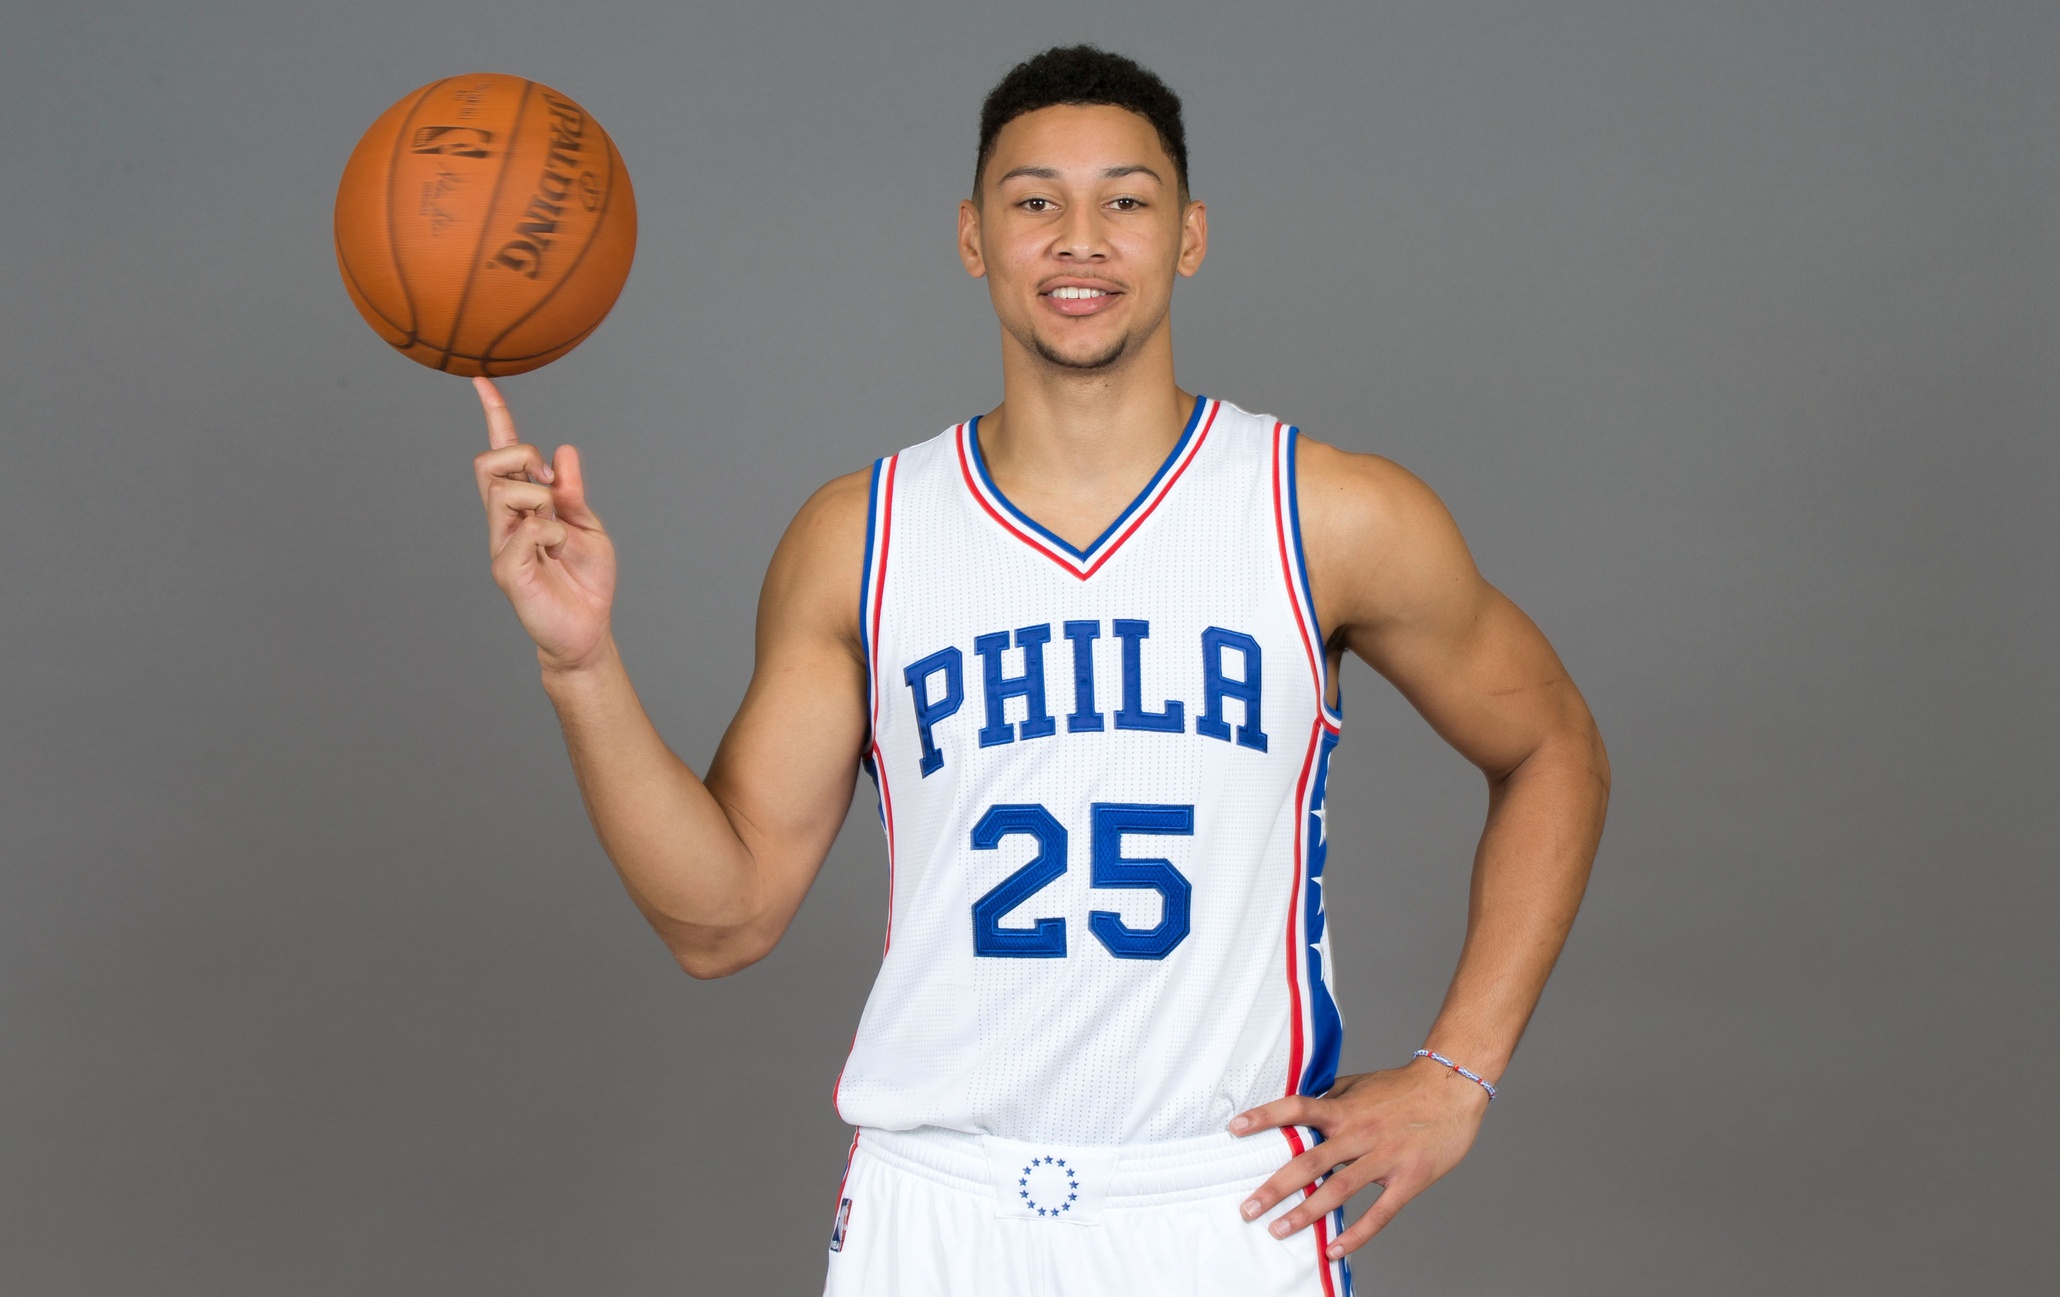 Ben Simmons named NBA Rookie of the Year